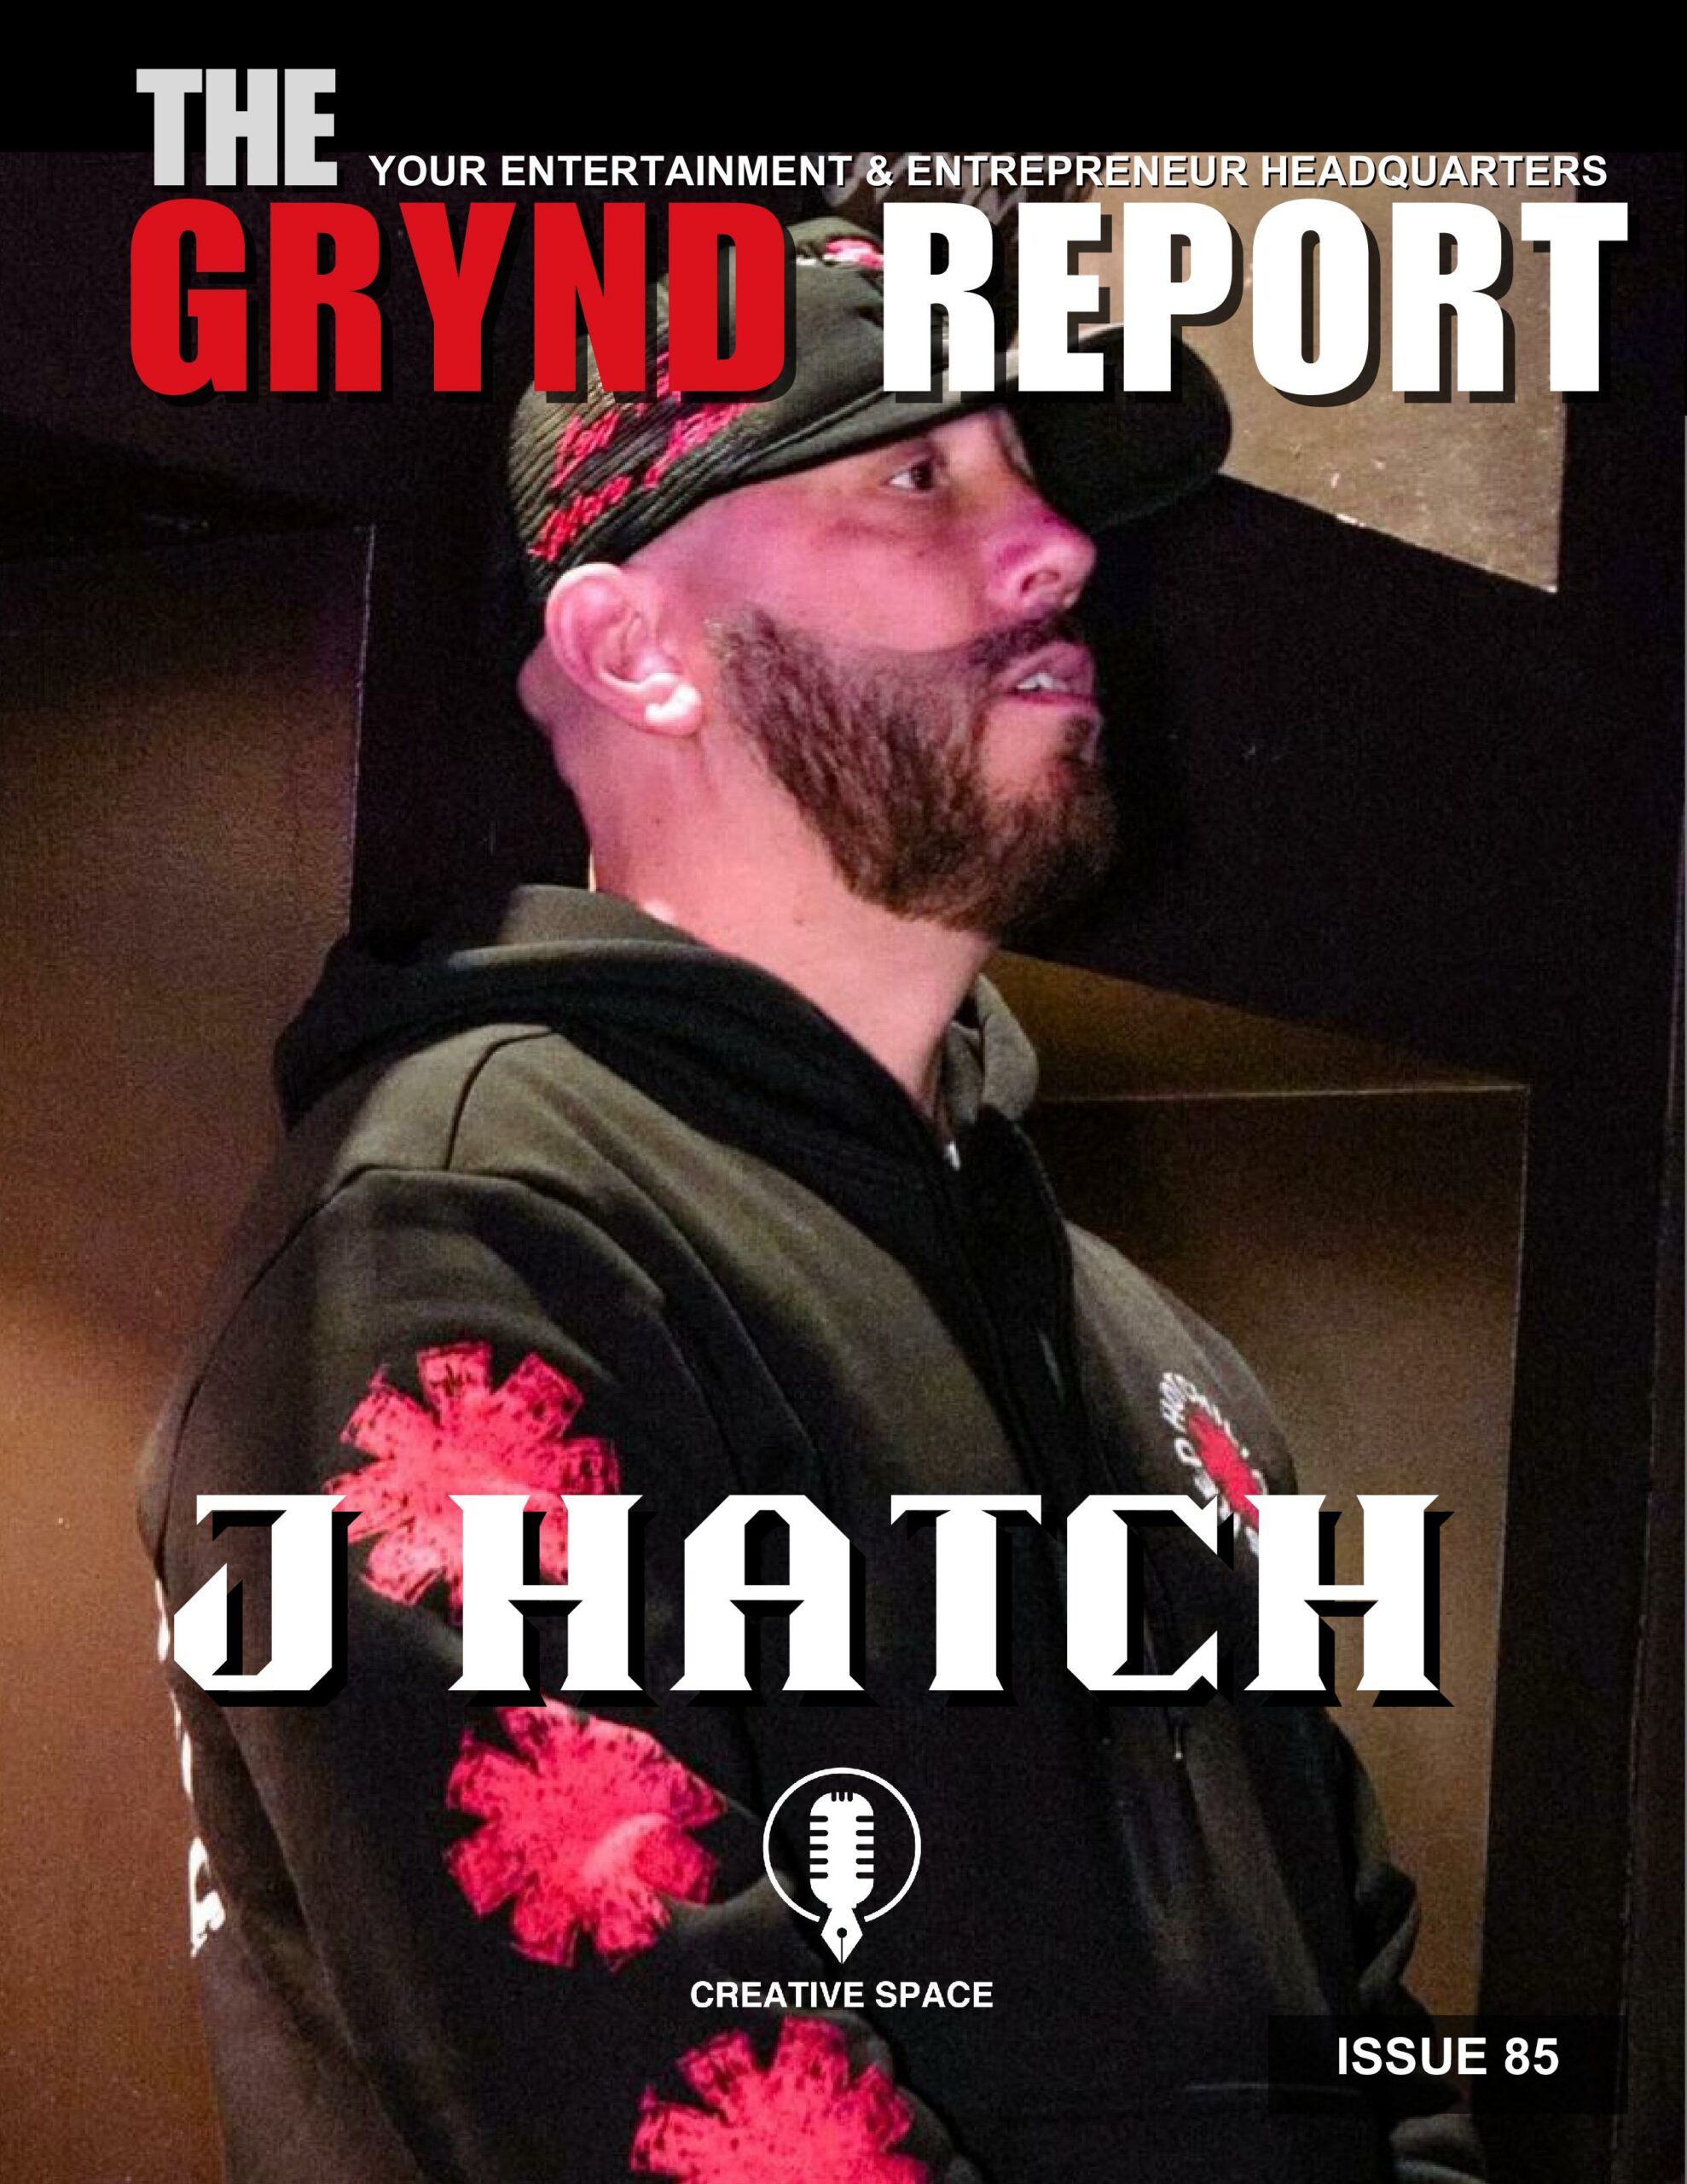 Now Available Issue 85 of The Grynd Report featuring J Hatch